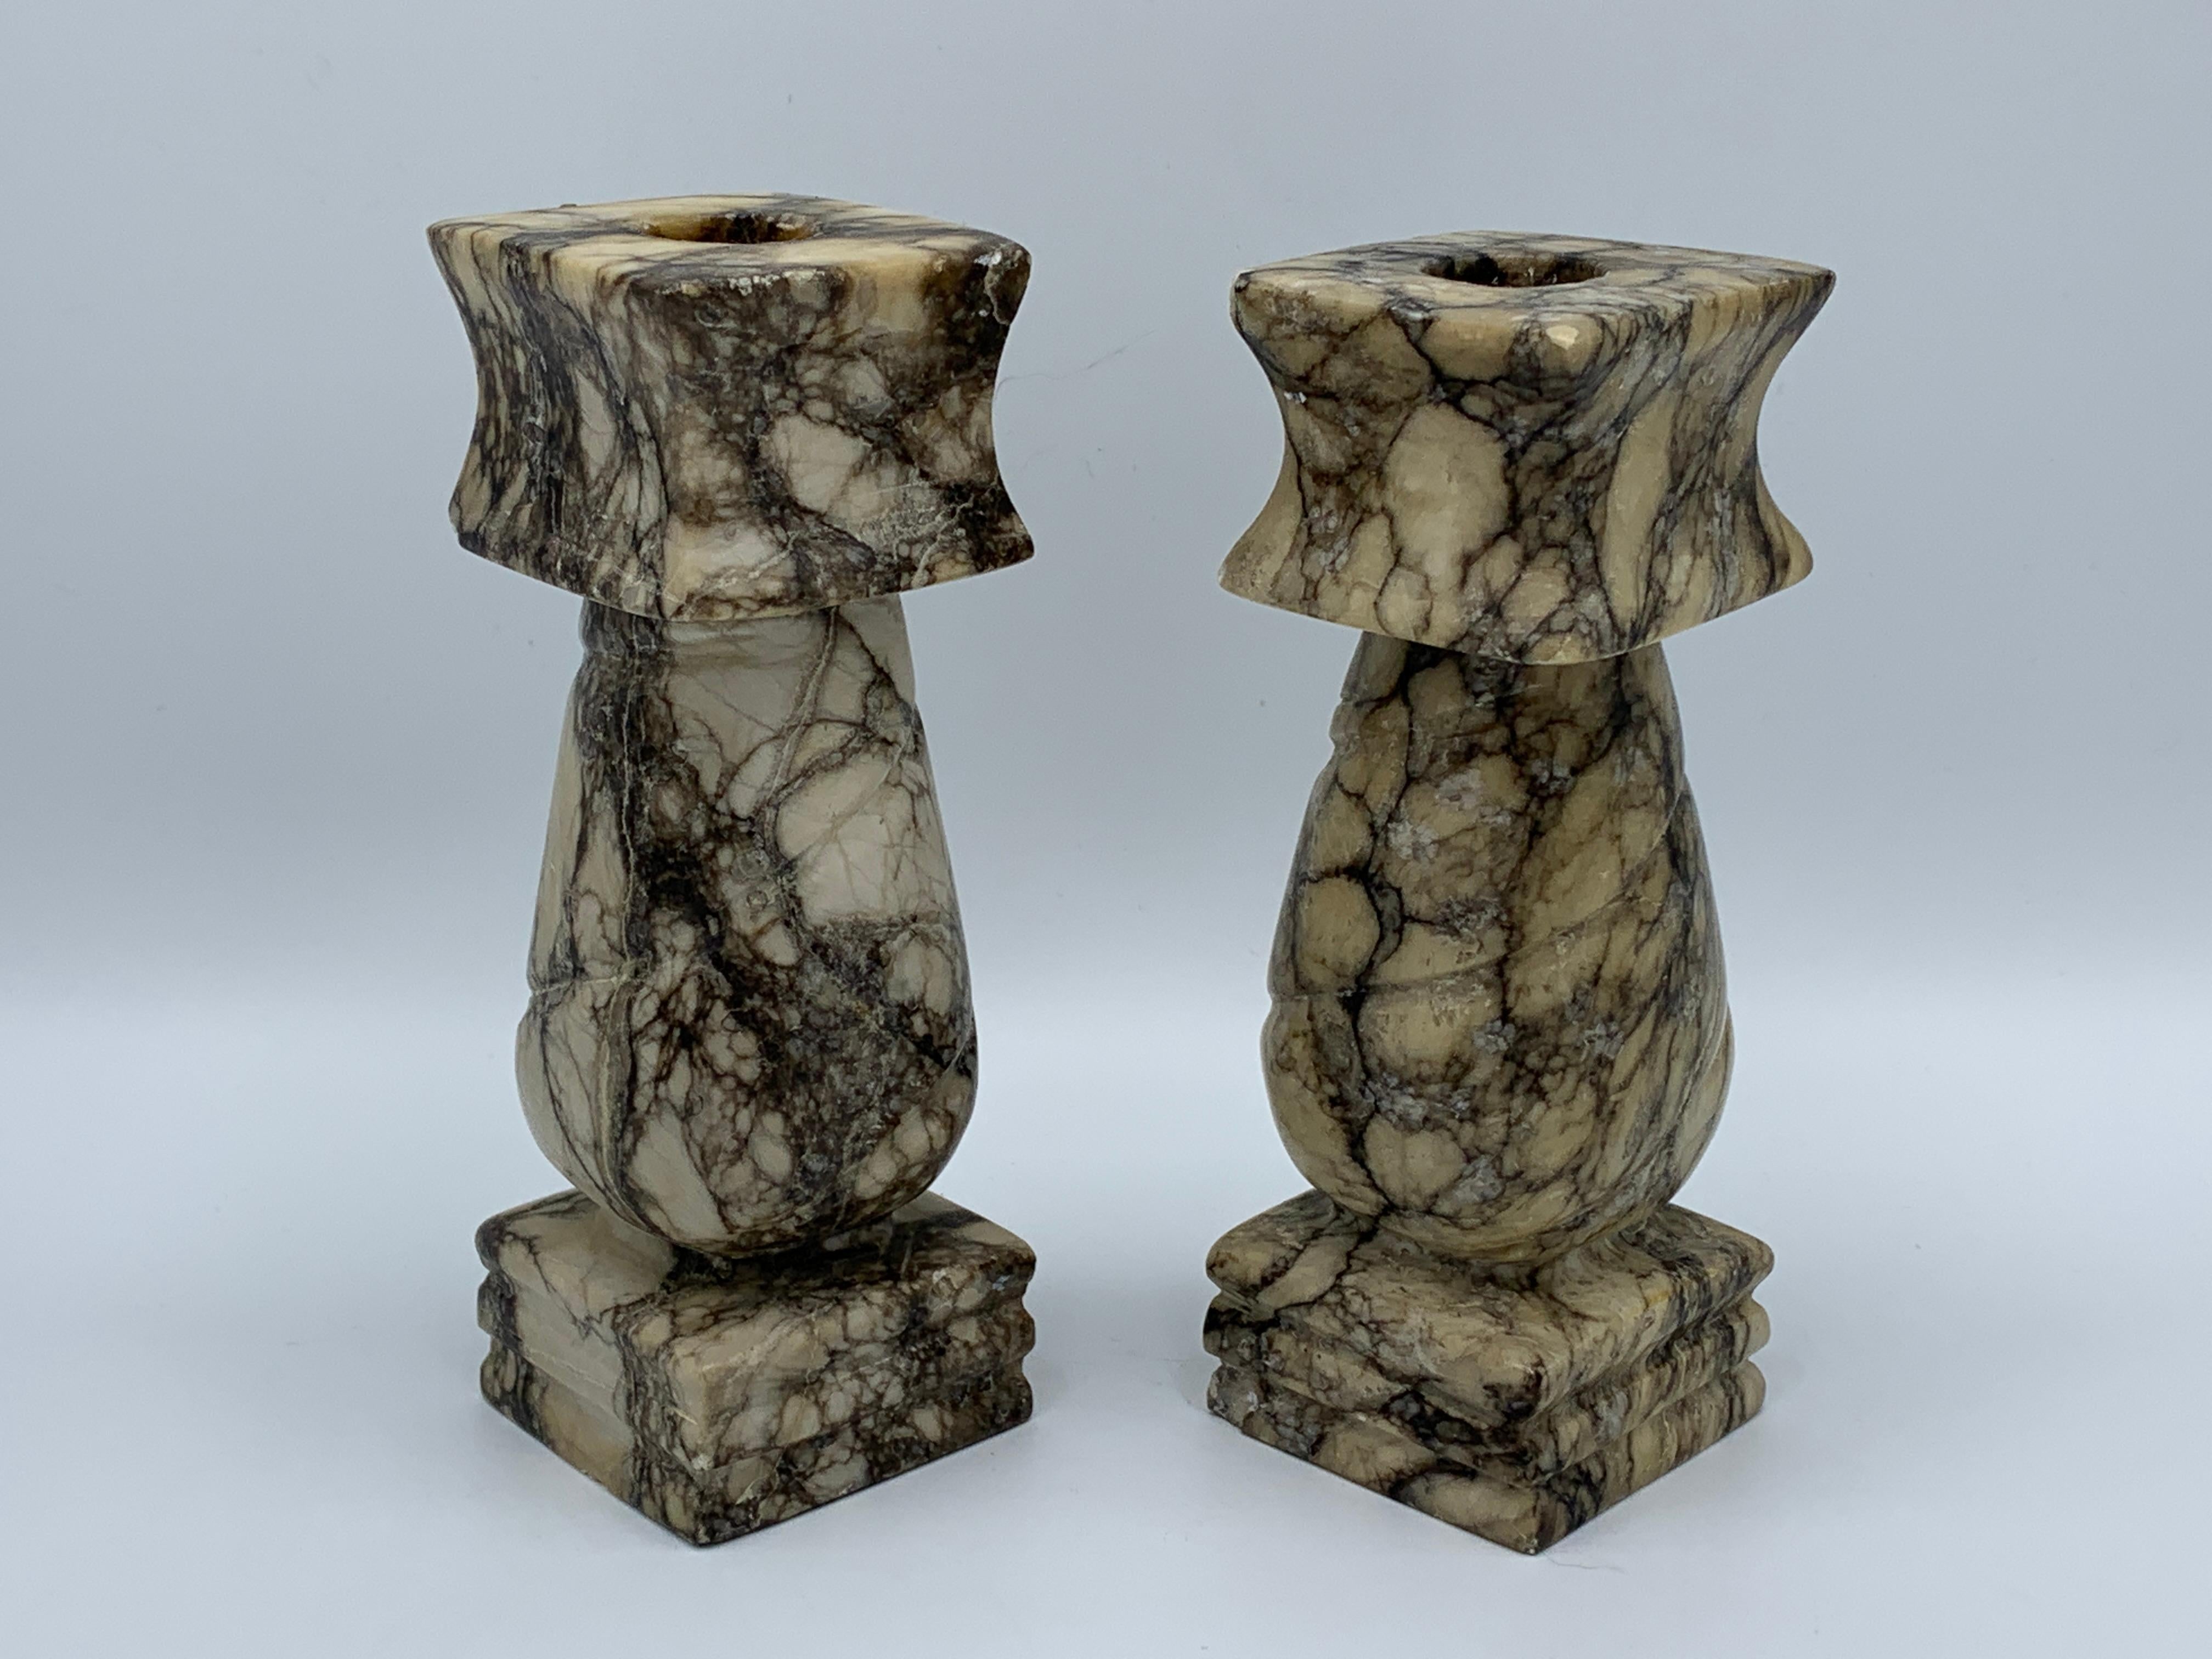 Offered is a beautiful, pair of 1960s Italian marble column candlesticks. The pair are white/beige and black/gray, with allover veining. Heavy, weighing 3lbs for the pair.